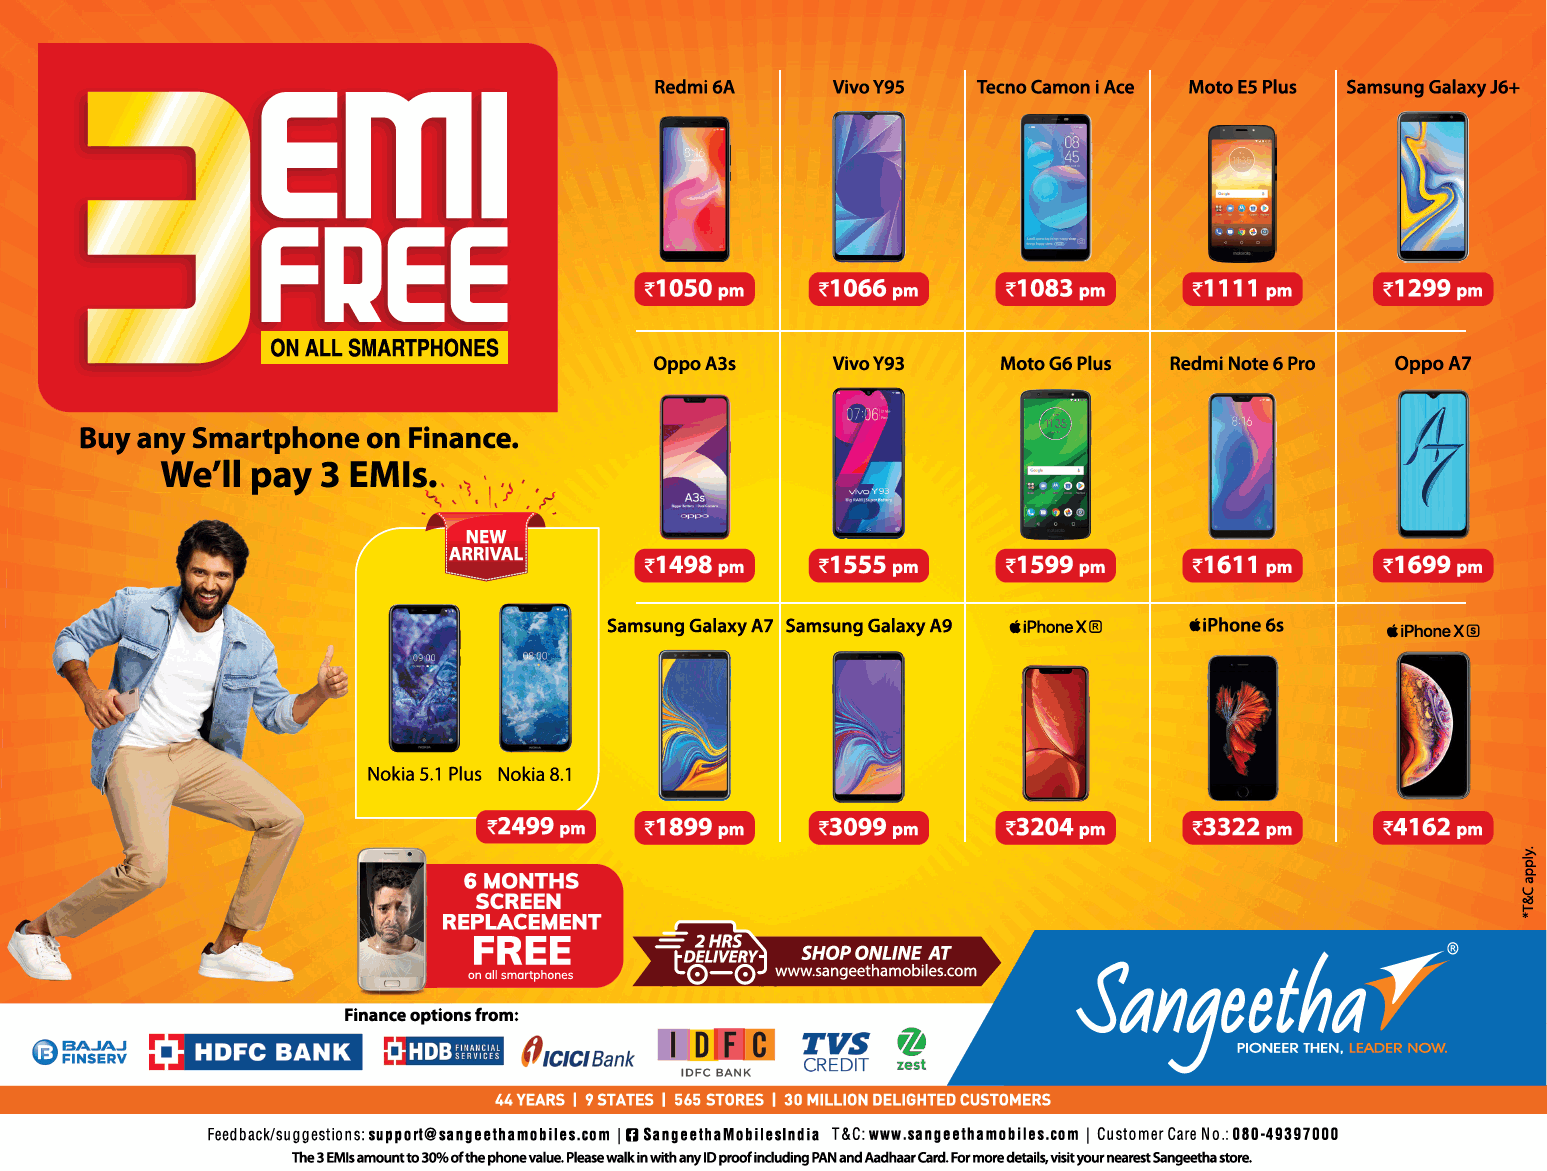 sangeetha-mobiles-3-emi-free-on-all-smartphones-ad-chennai-times-09-02-2019.png